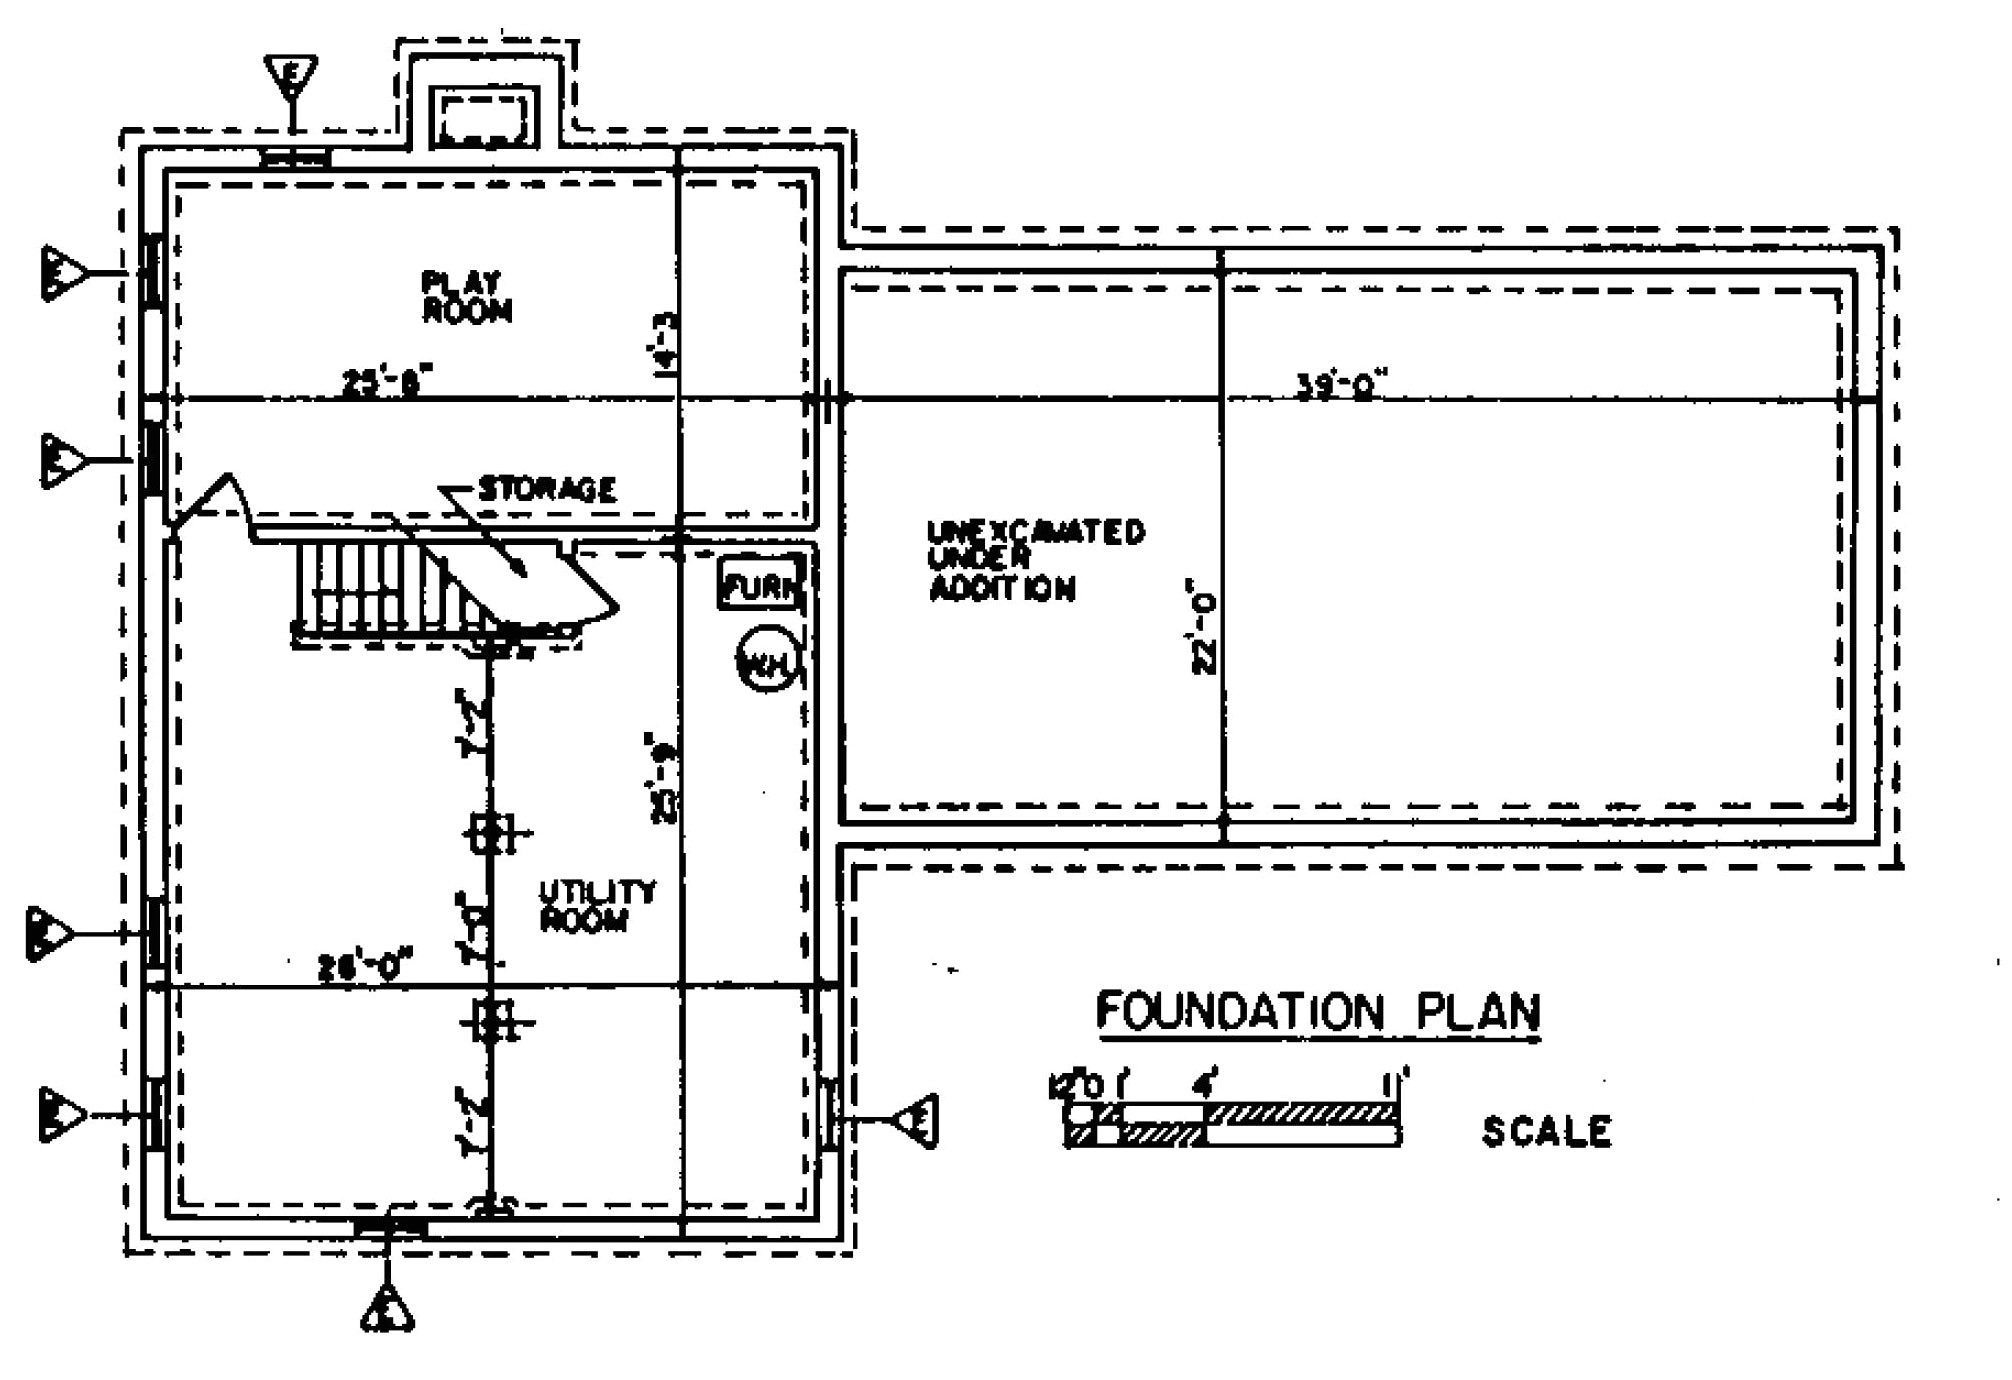 Home Plans with Basement Foundations Shed Project This is How to Build A Shed Floor Foundation